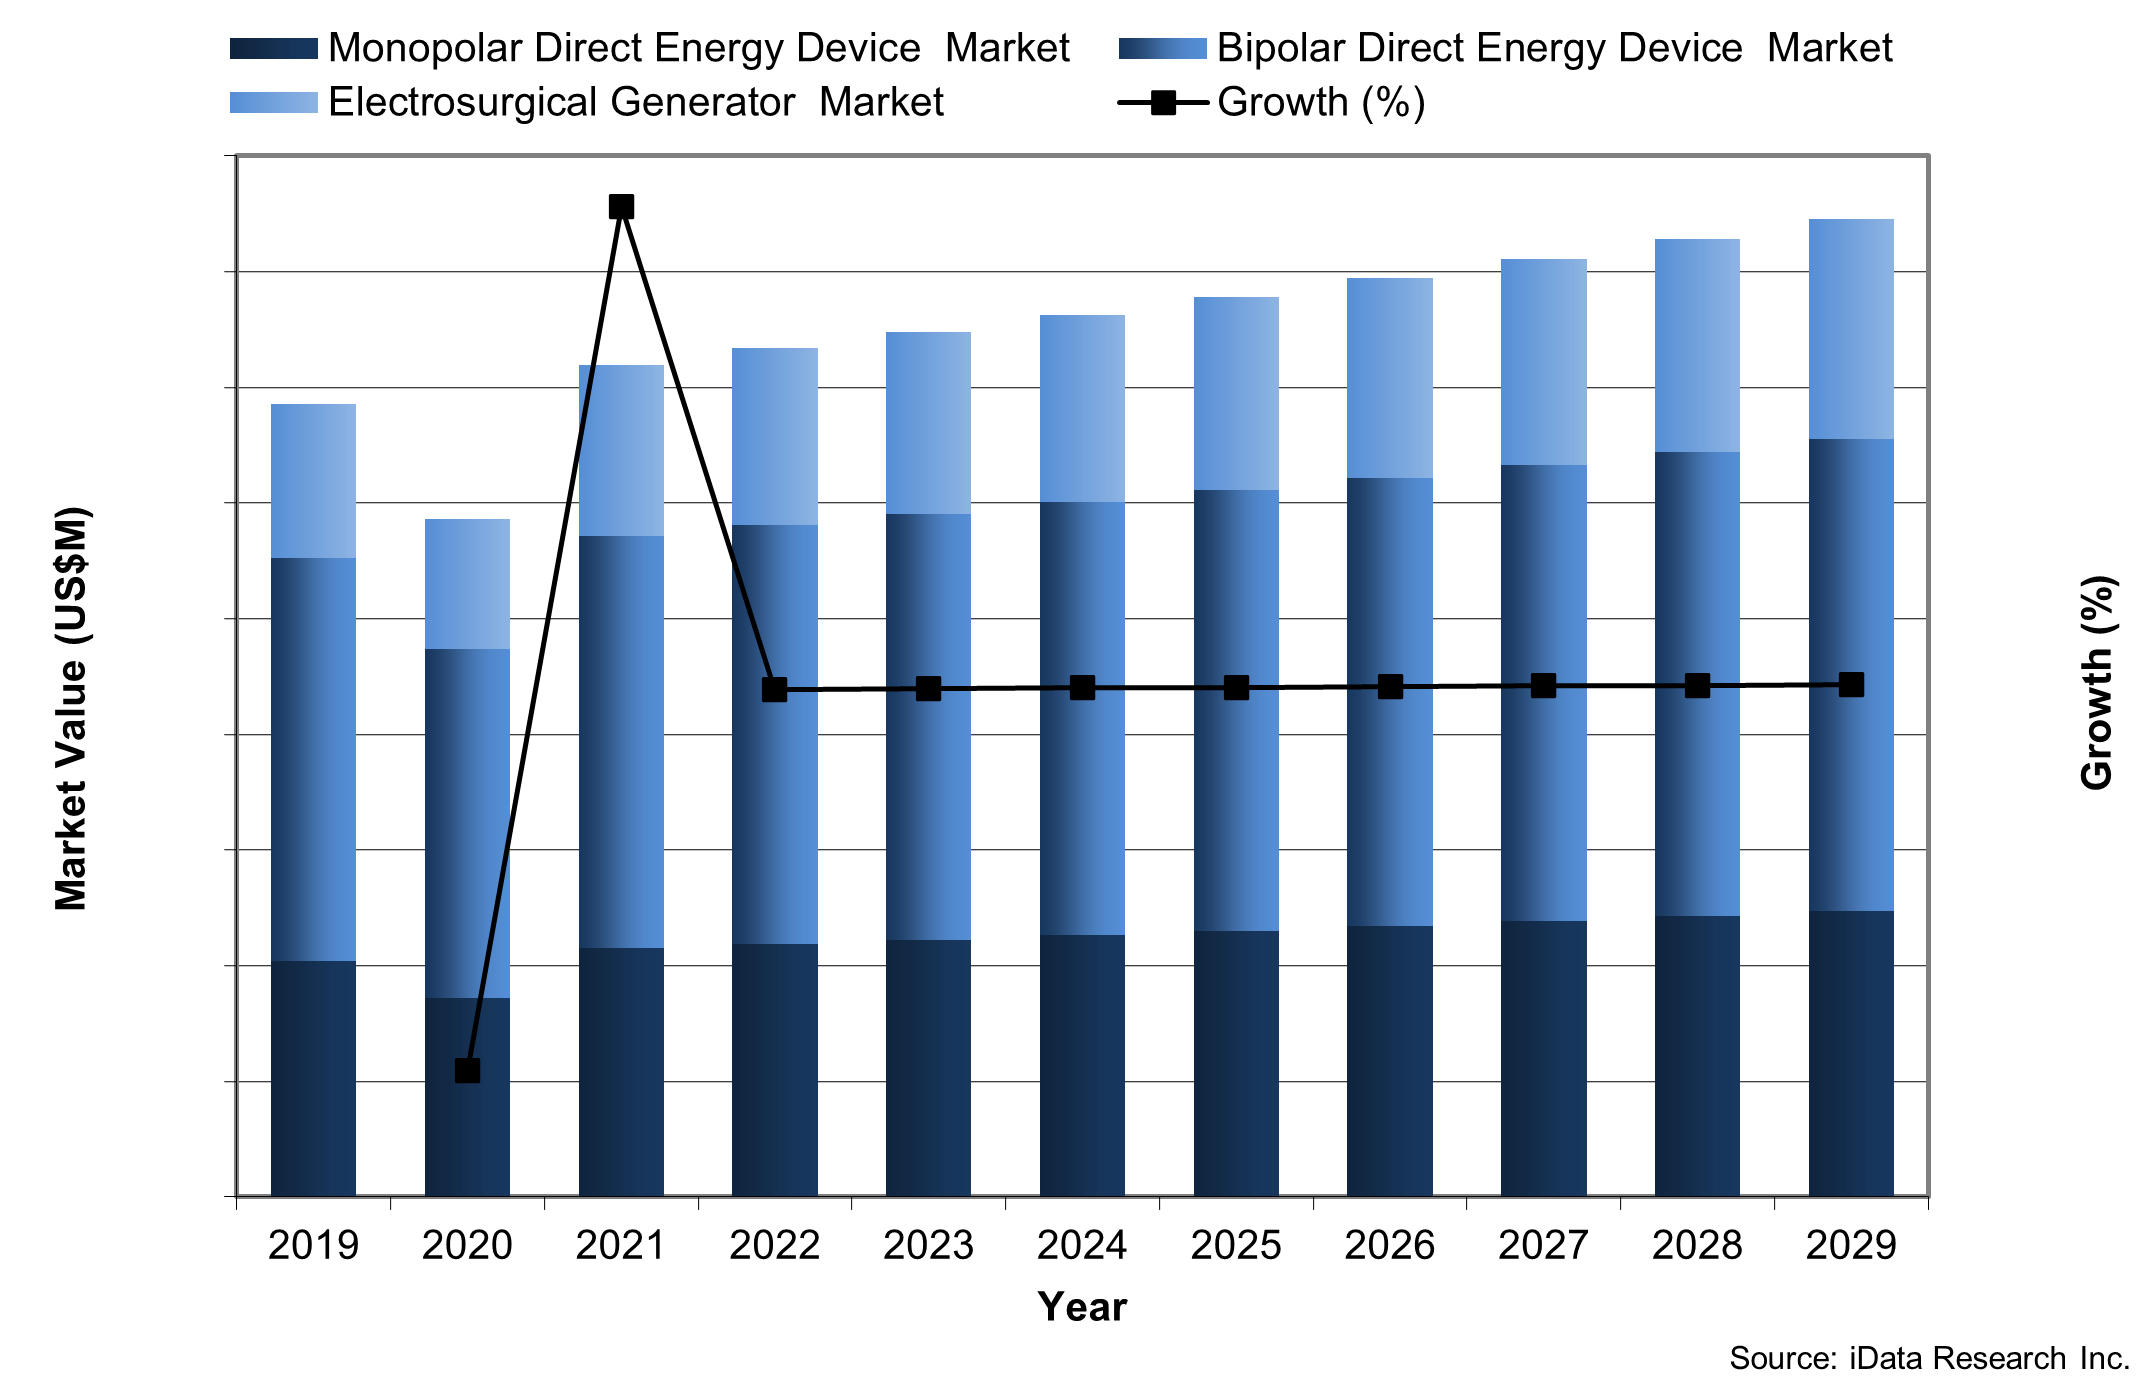 Chart 2 Direct Energy Device Market Value 2019-2029